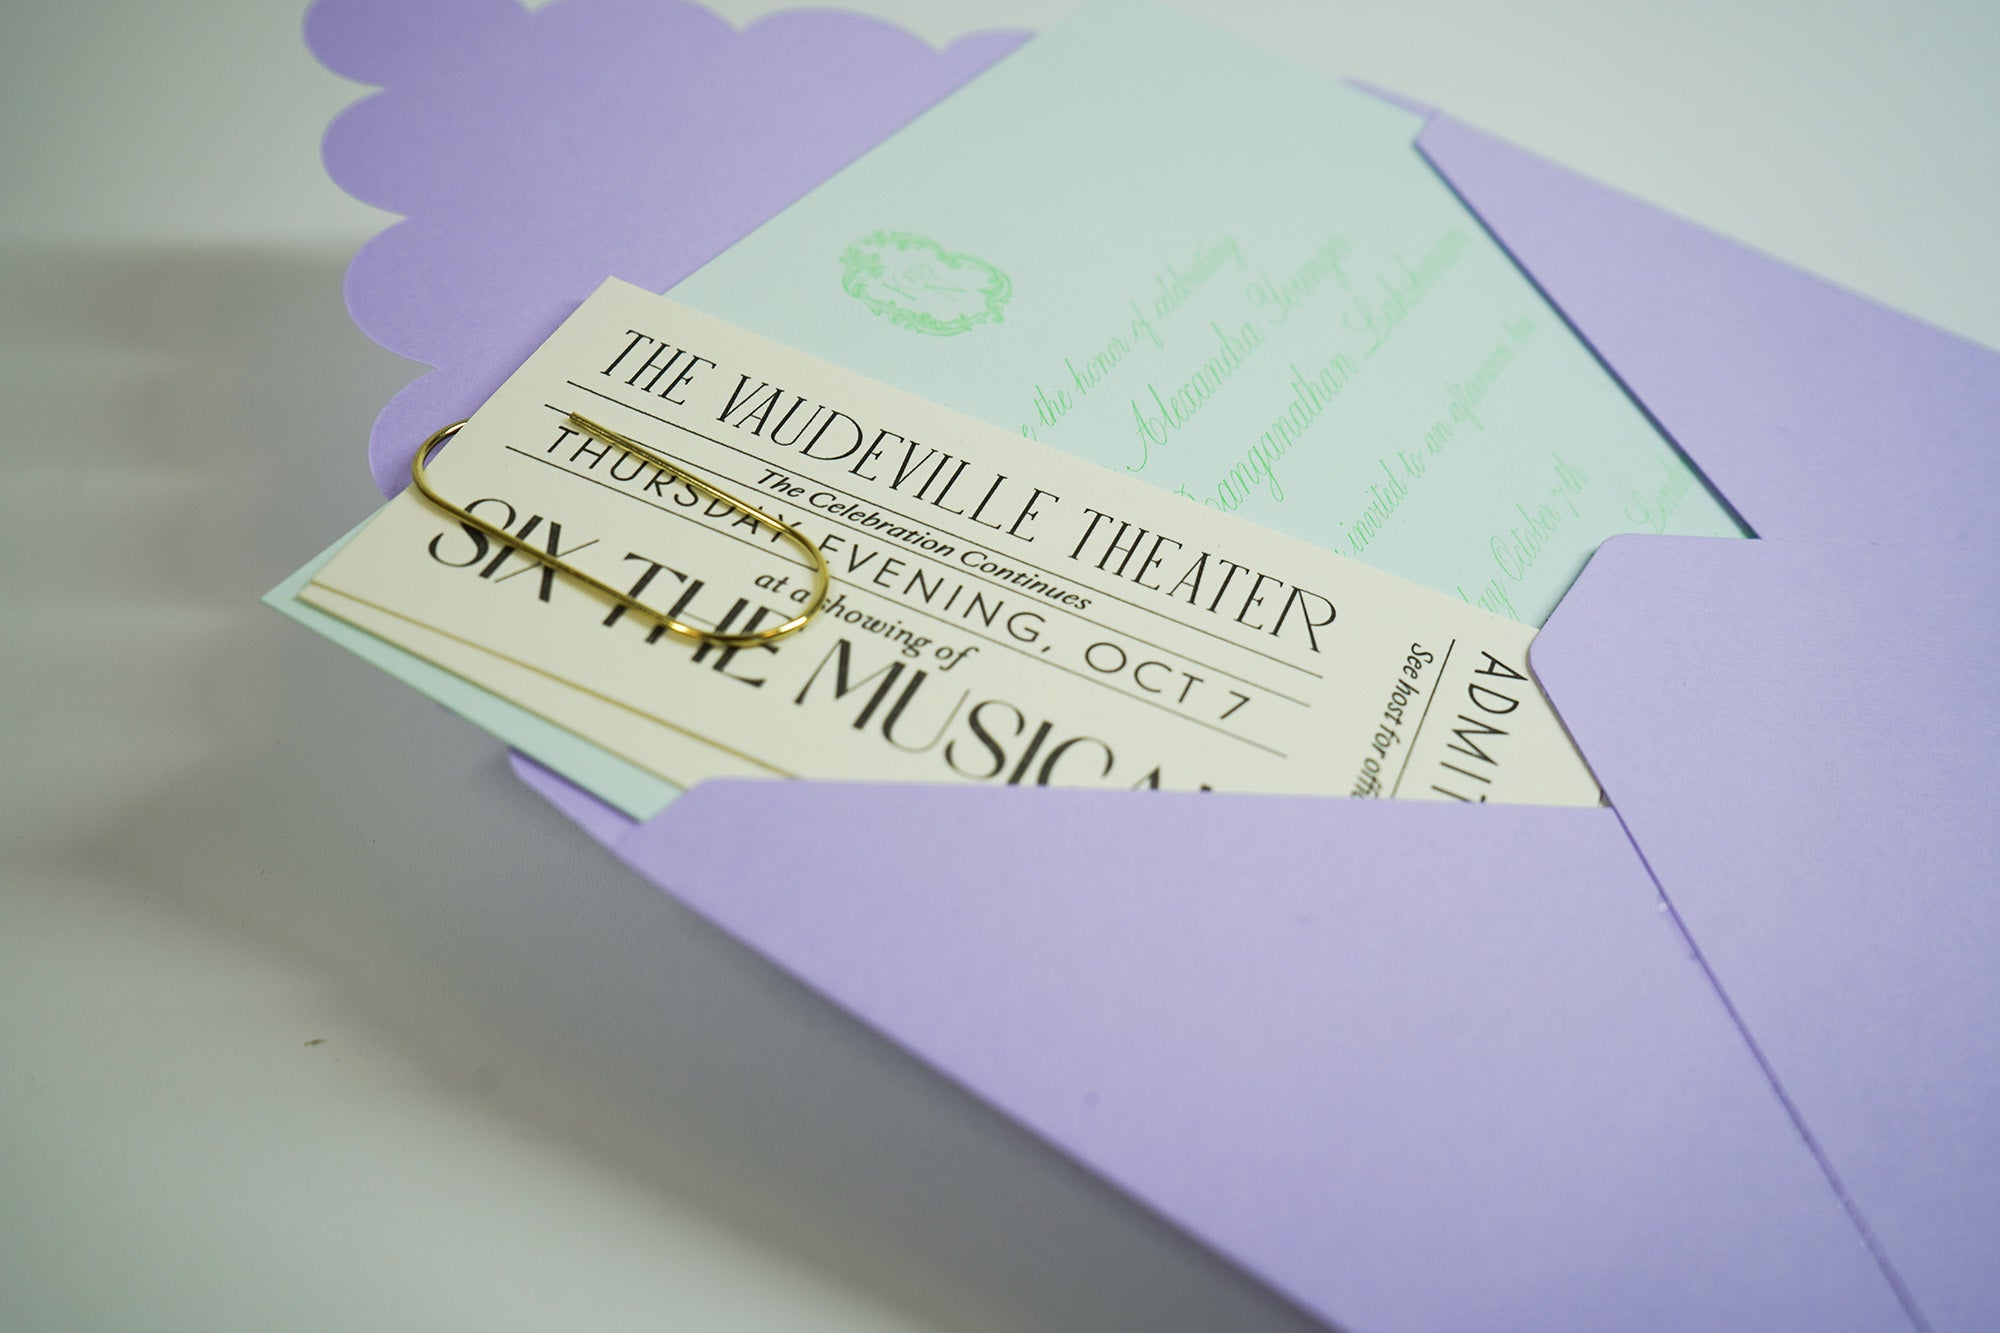 Scalloped envelope holding letterpress tickets and invitation, held together with gold wide paperclip